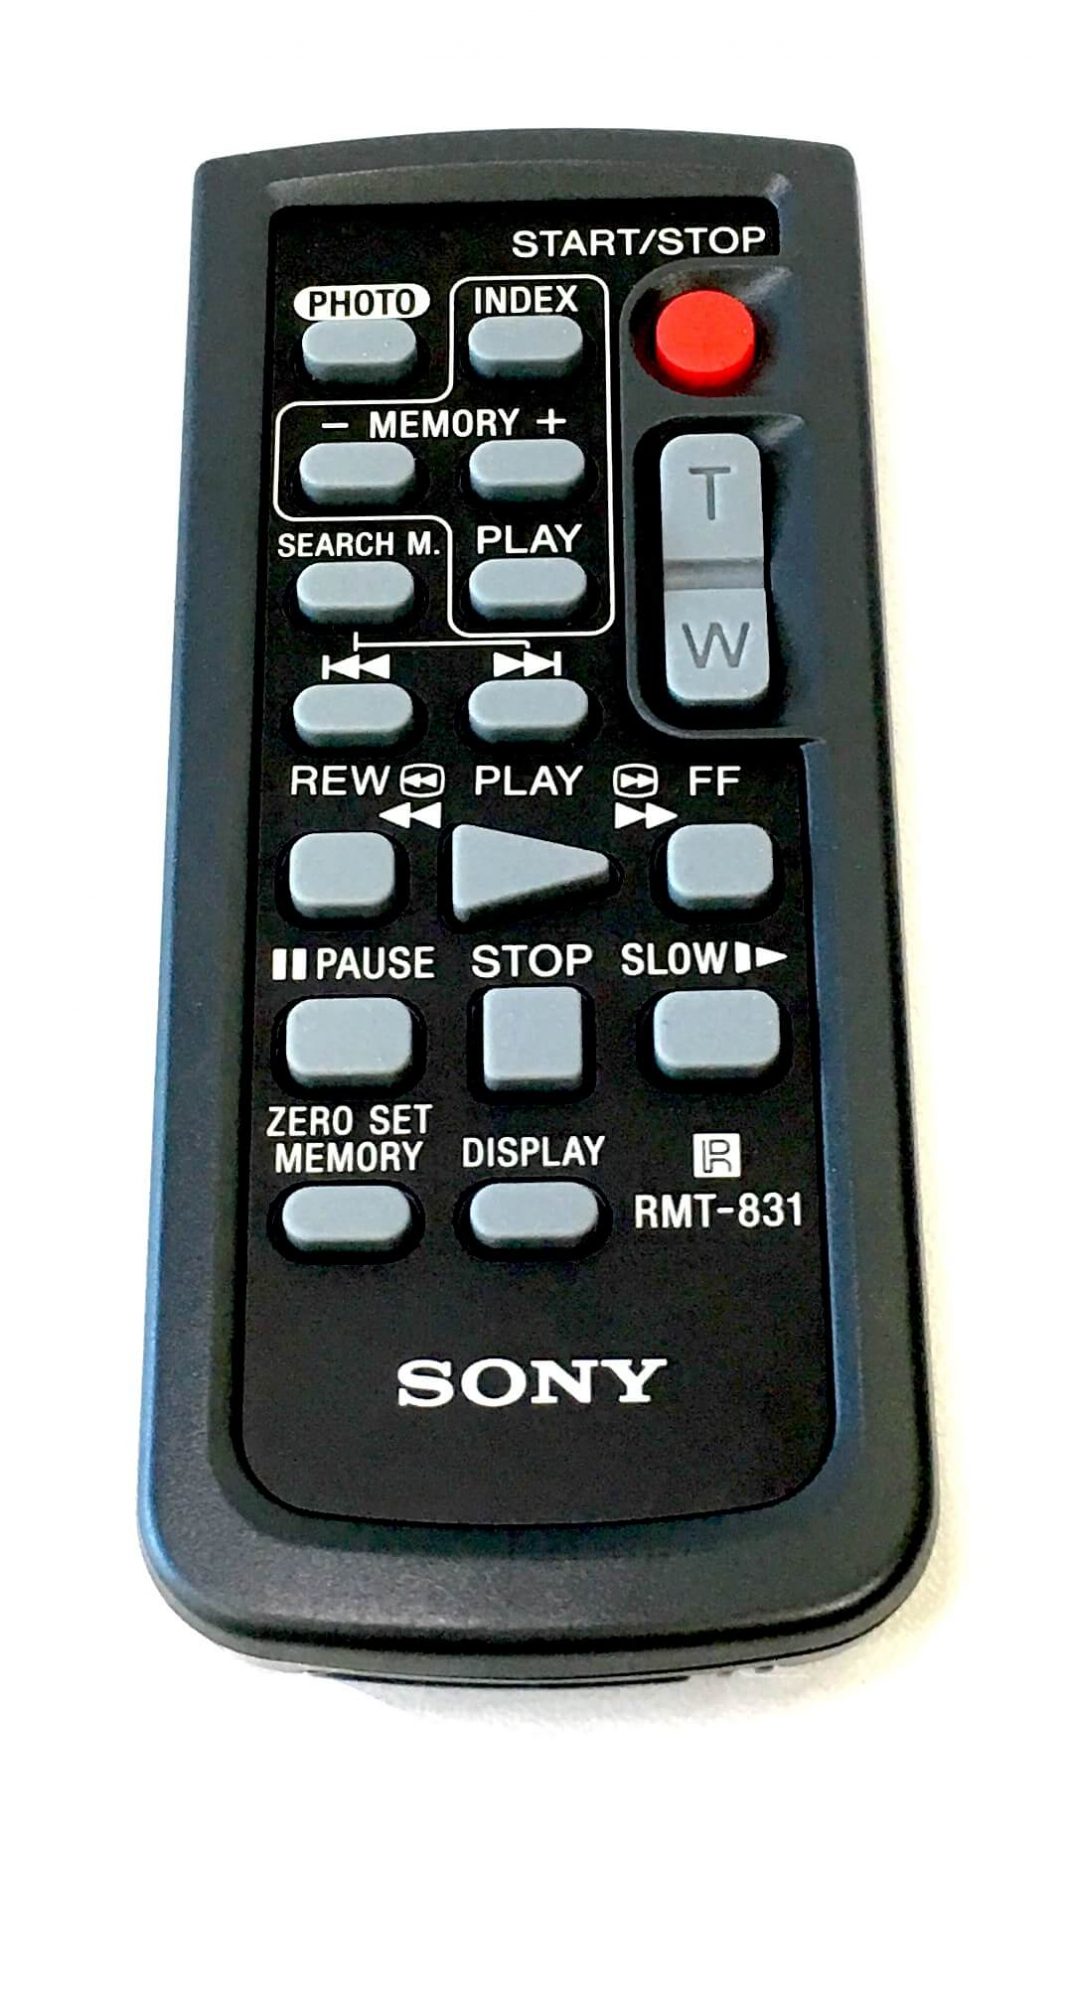 Original wireless remote control that came with the Sony FX-1000 camcorder. It is a genuine Sony part, sourced directly from Sony USA. Brand new factory fresh. Free Shipping.